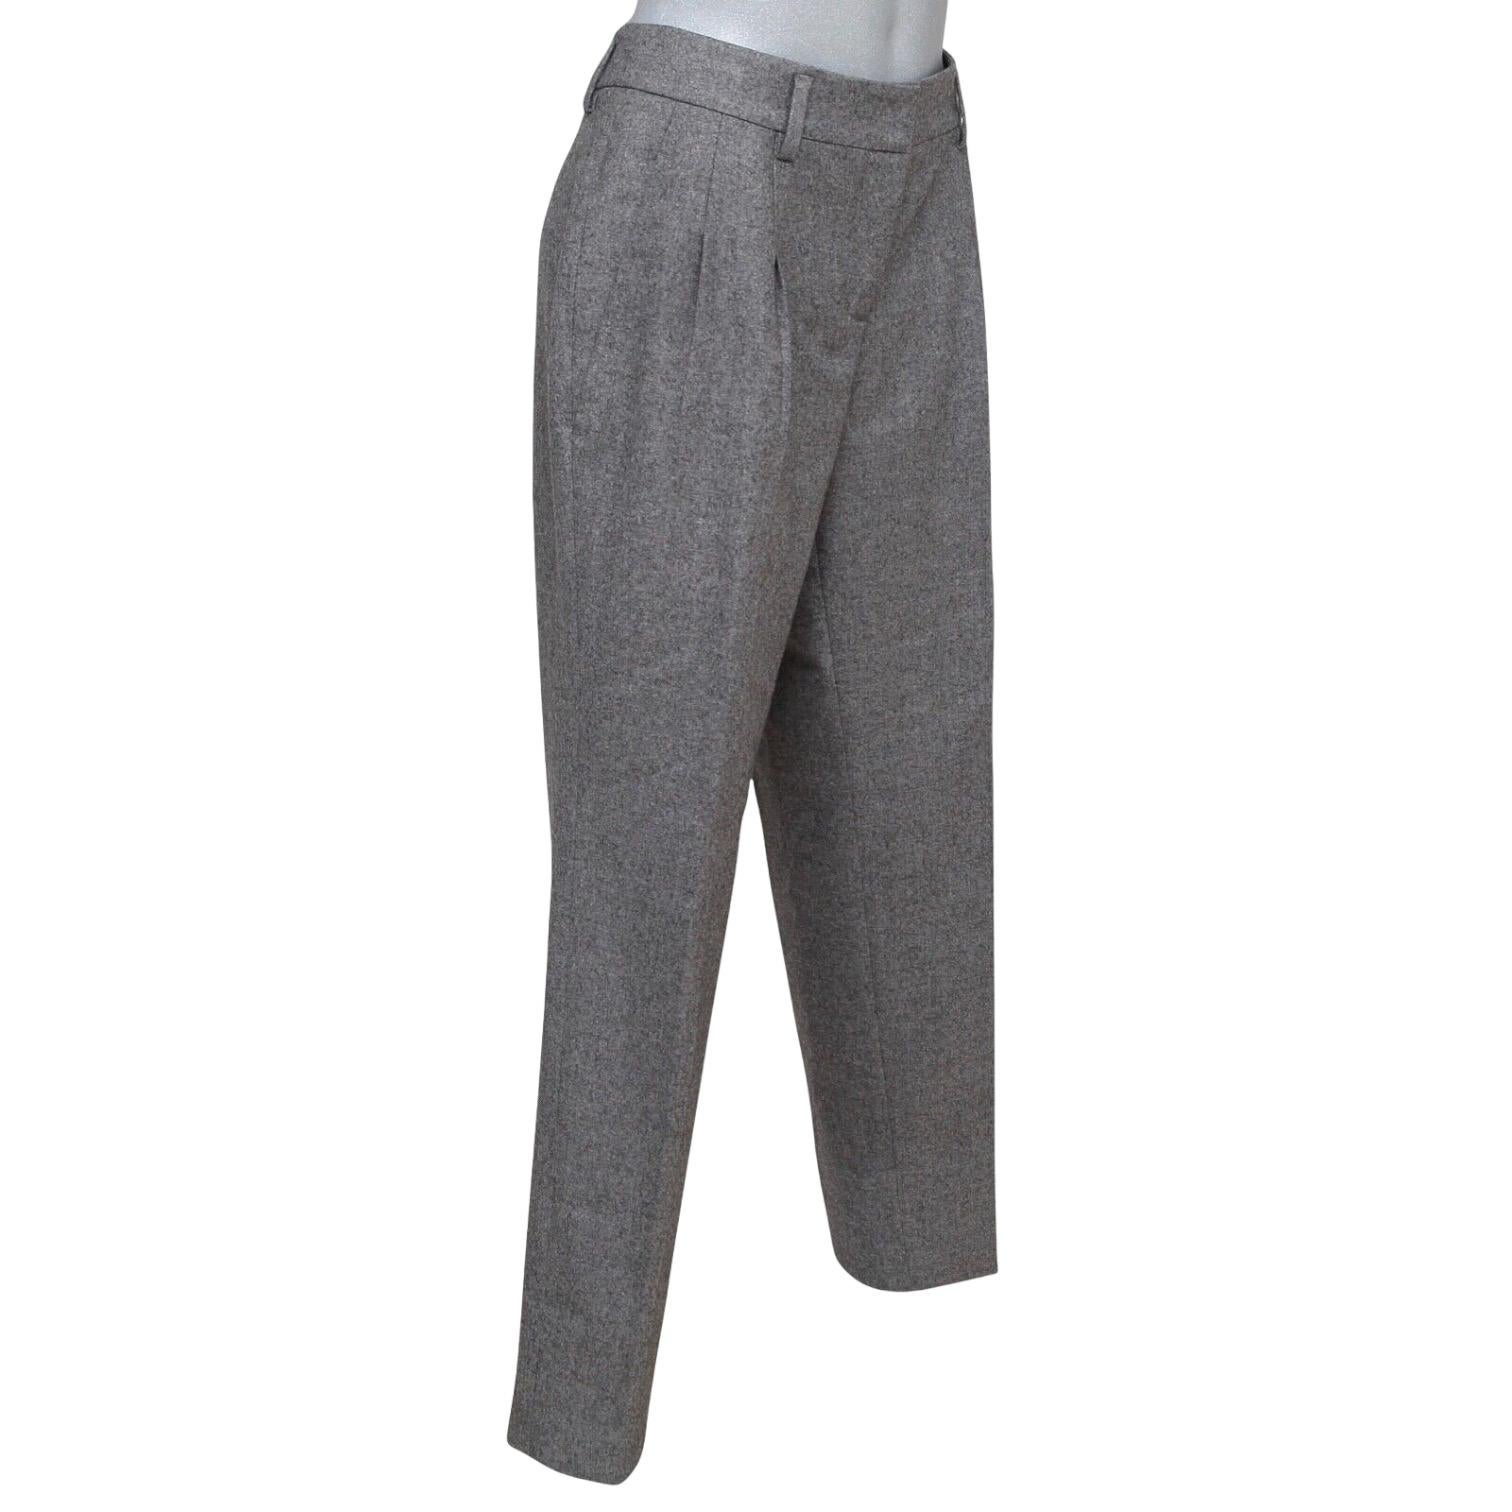 GUARANTEED AUTHENTIC AKRIS PUNTO GREY WOOL PANTS


Details:
• Straight leg pant in a classic grey color.
• Pleated at front with zipper, double hook and button closure.
• Dual front pockets.
• Backside dual slip pockets.
• Belt loops.
•